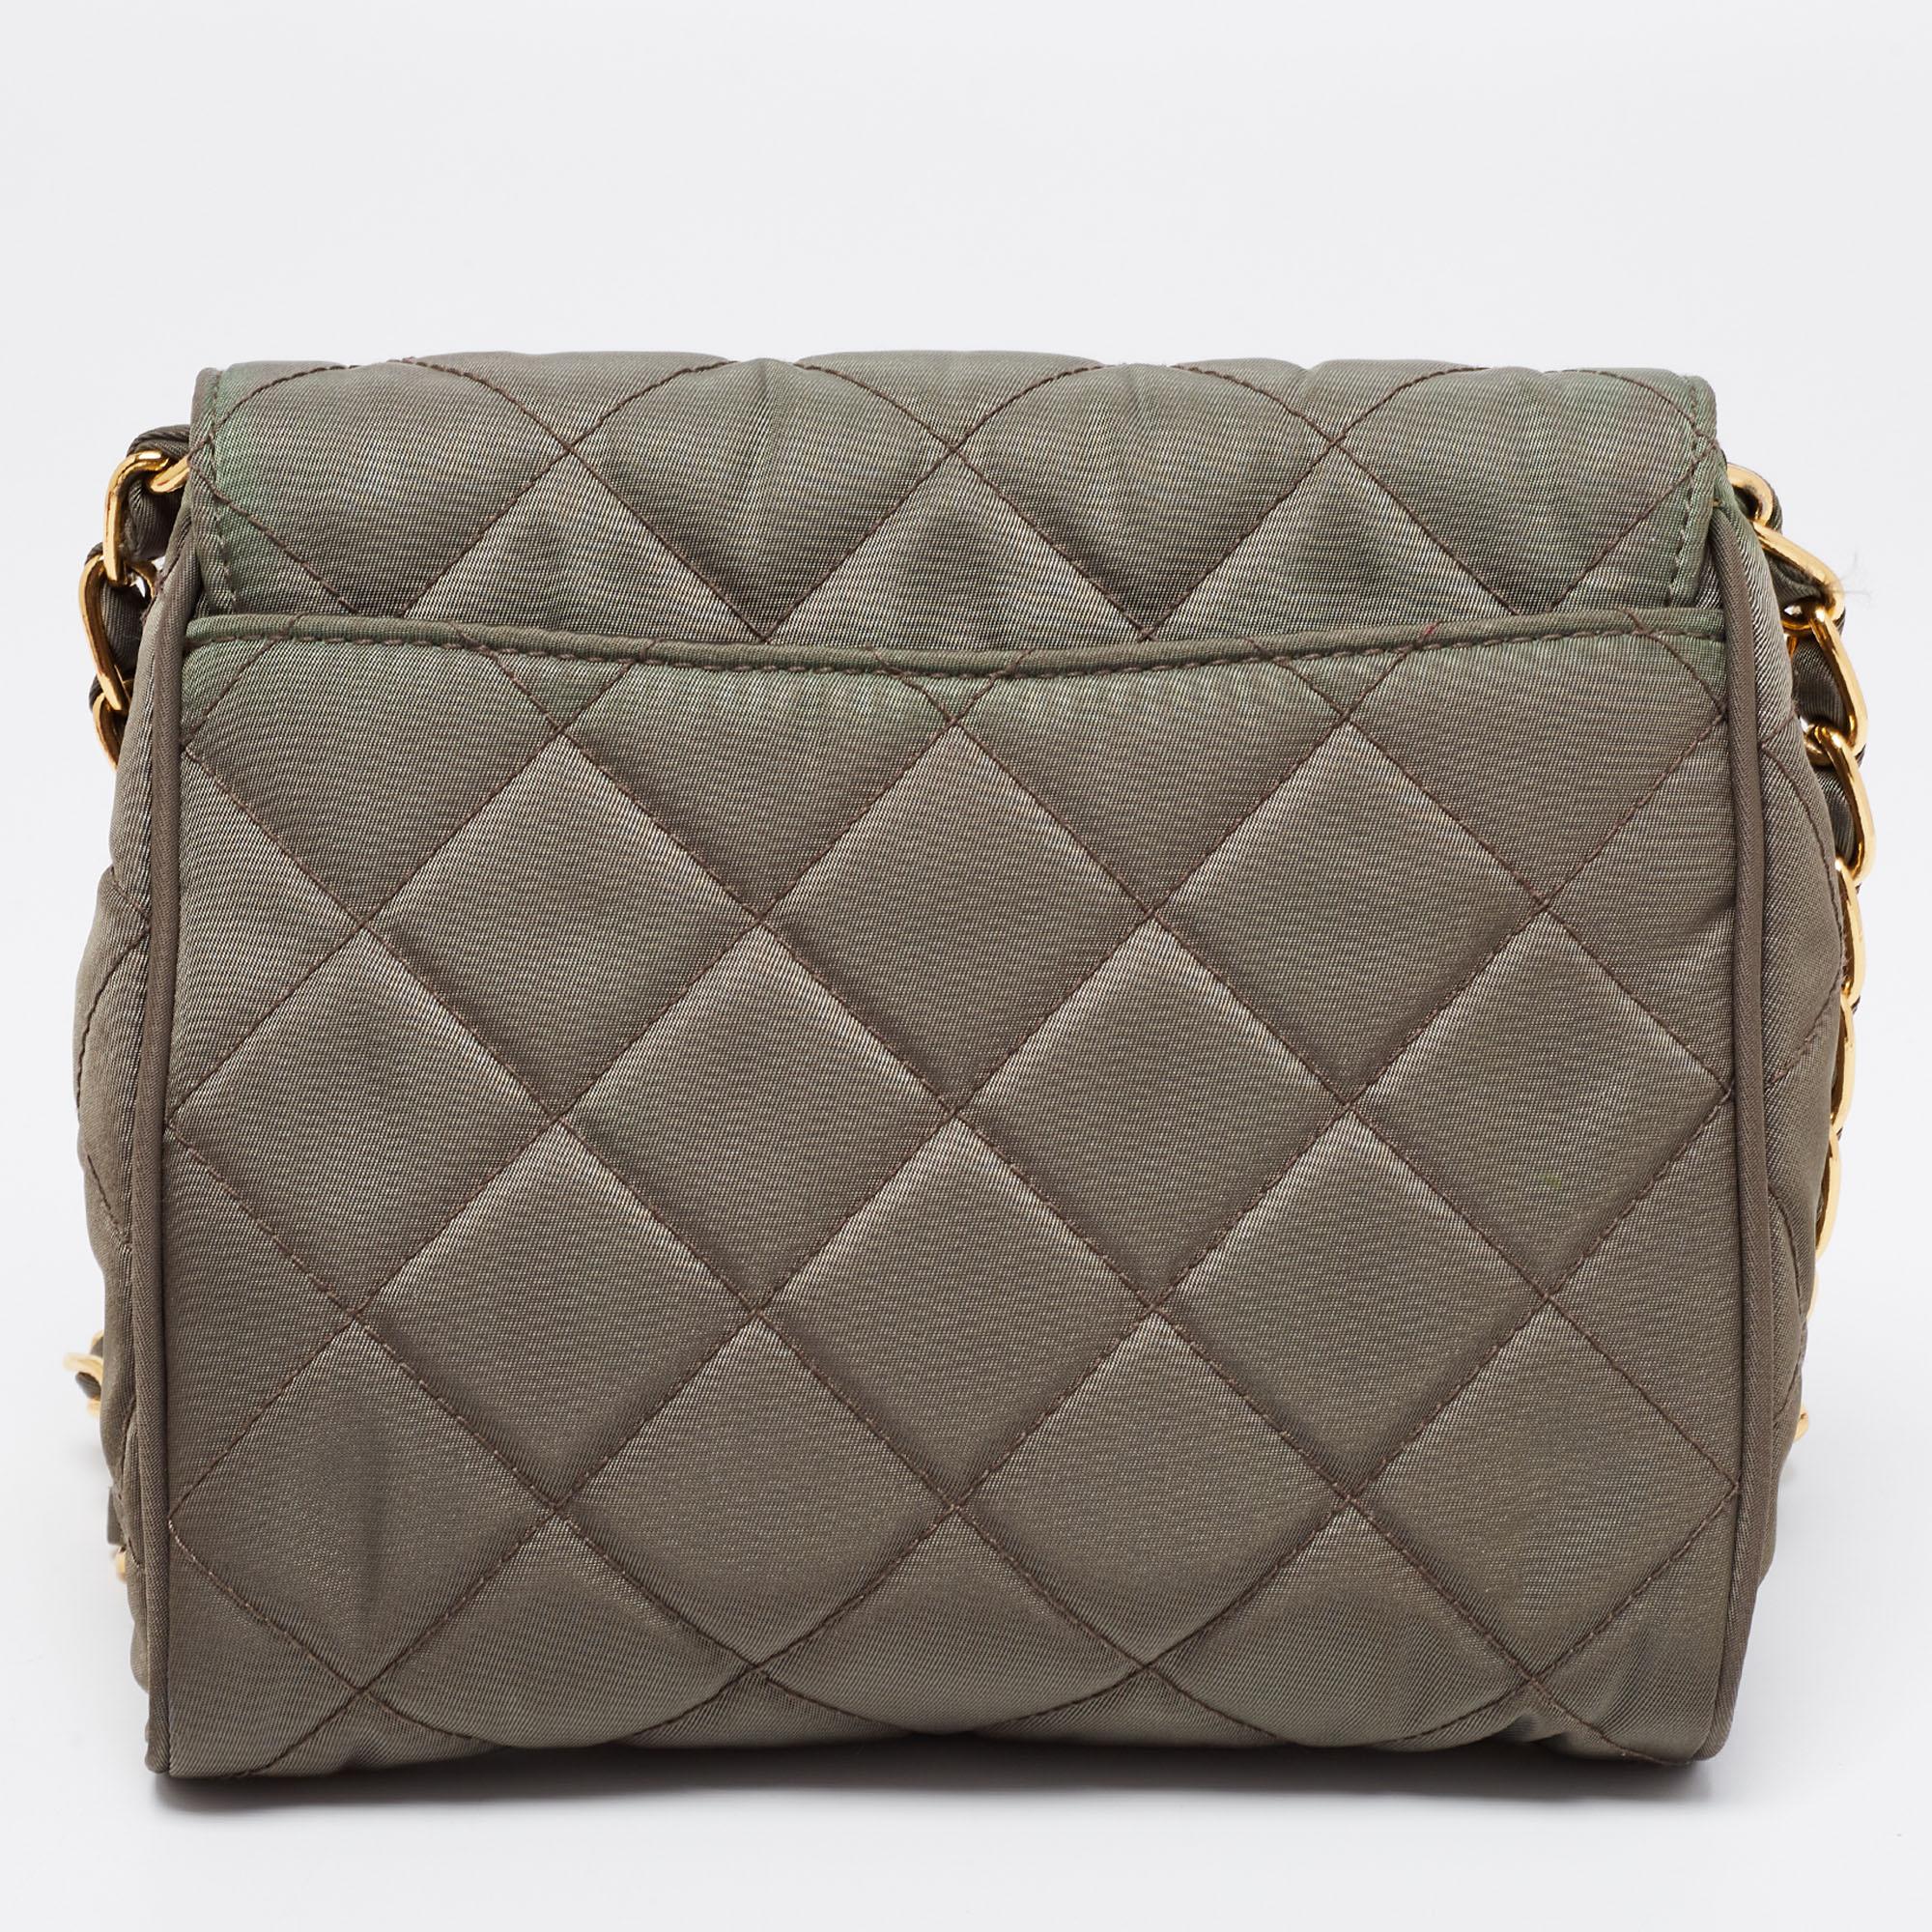 This crossbody bag from Prada is a perfect balance of elegance and practical utility. The olive green bag has a quilted exterior and flaunts an interwoven chain strap. It features a push-lock closure that leads to a well-sized interior capable of